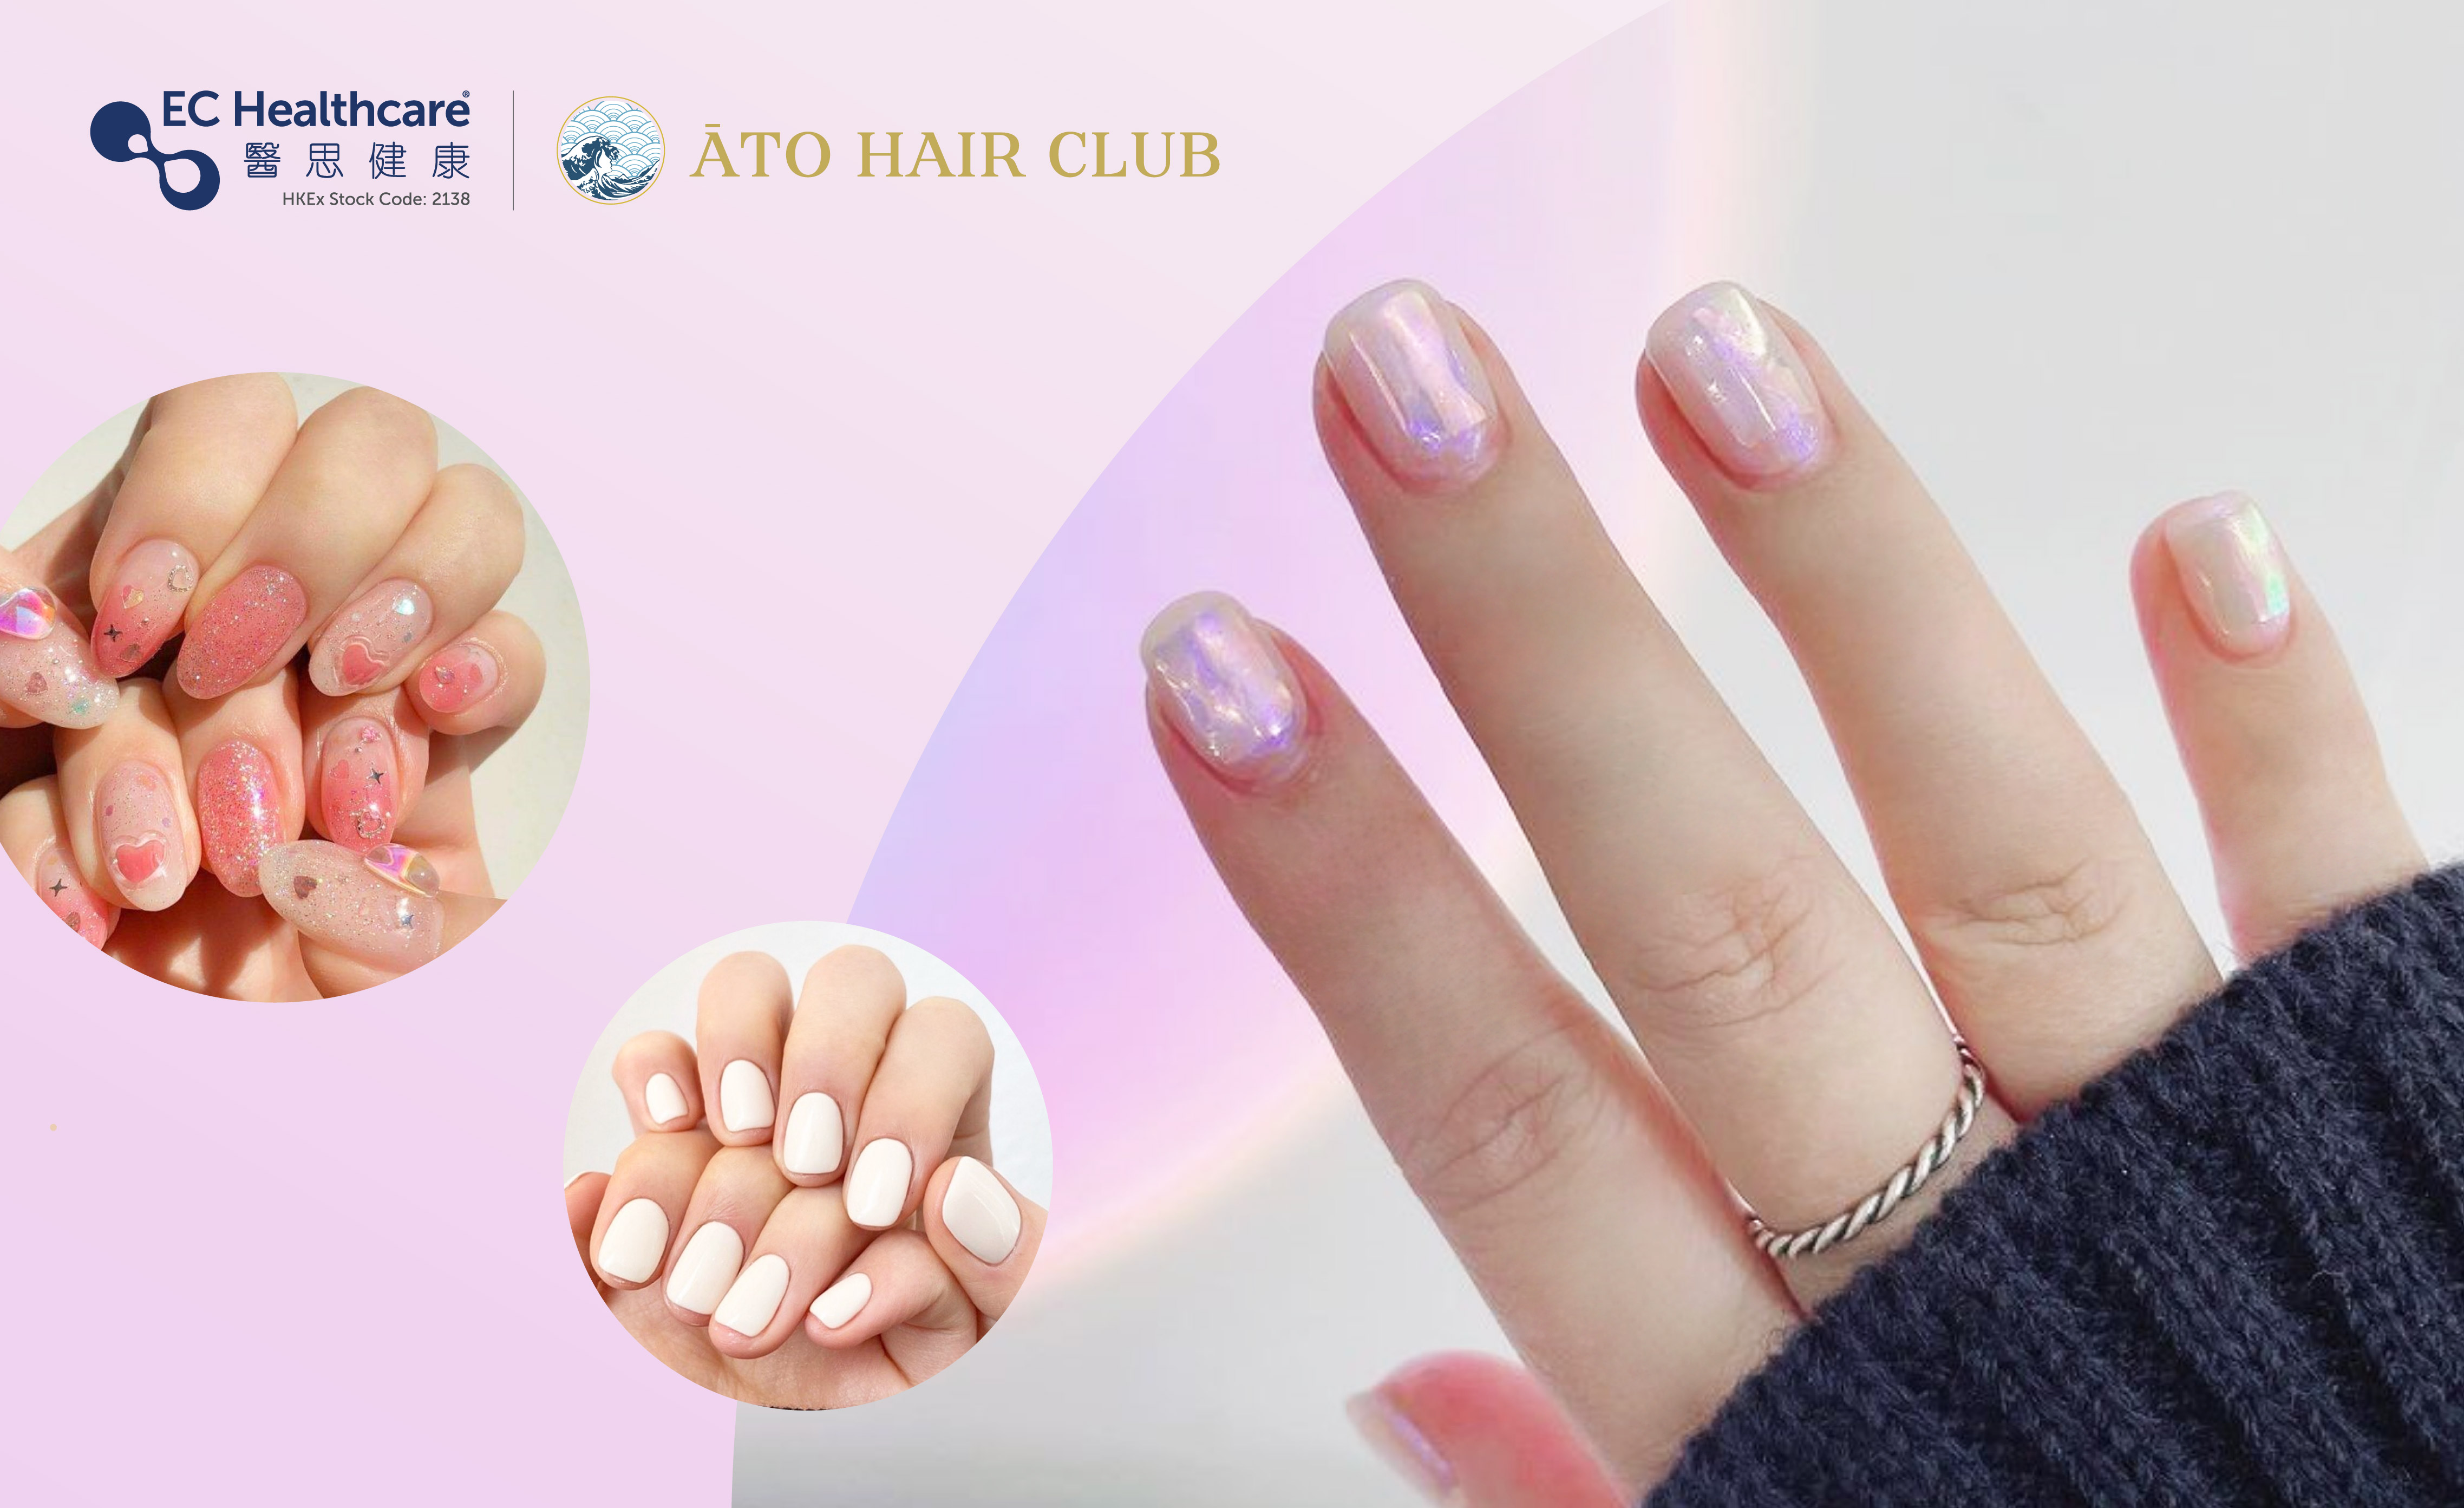 Radiant Nails for Radiant You: 7 Must-Try Japanese & Korean Nail Art Styles  for a Flawless, Porcelain Look | EC Healthcare